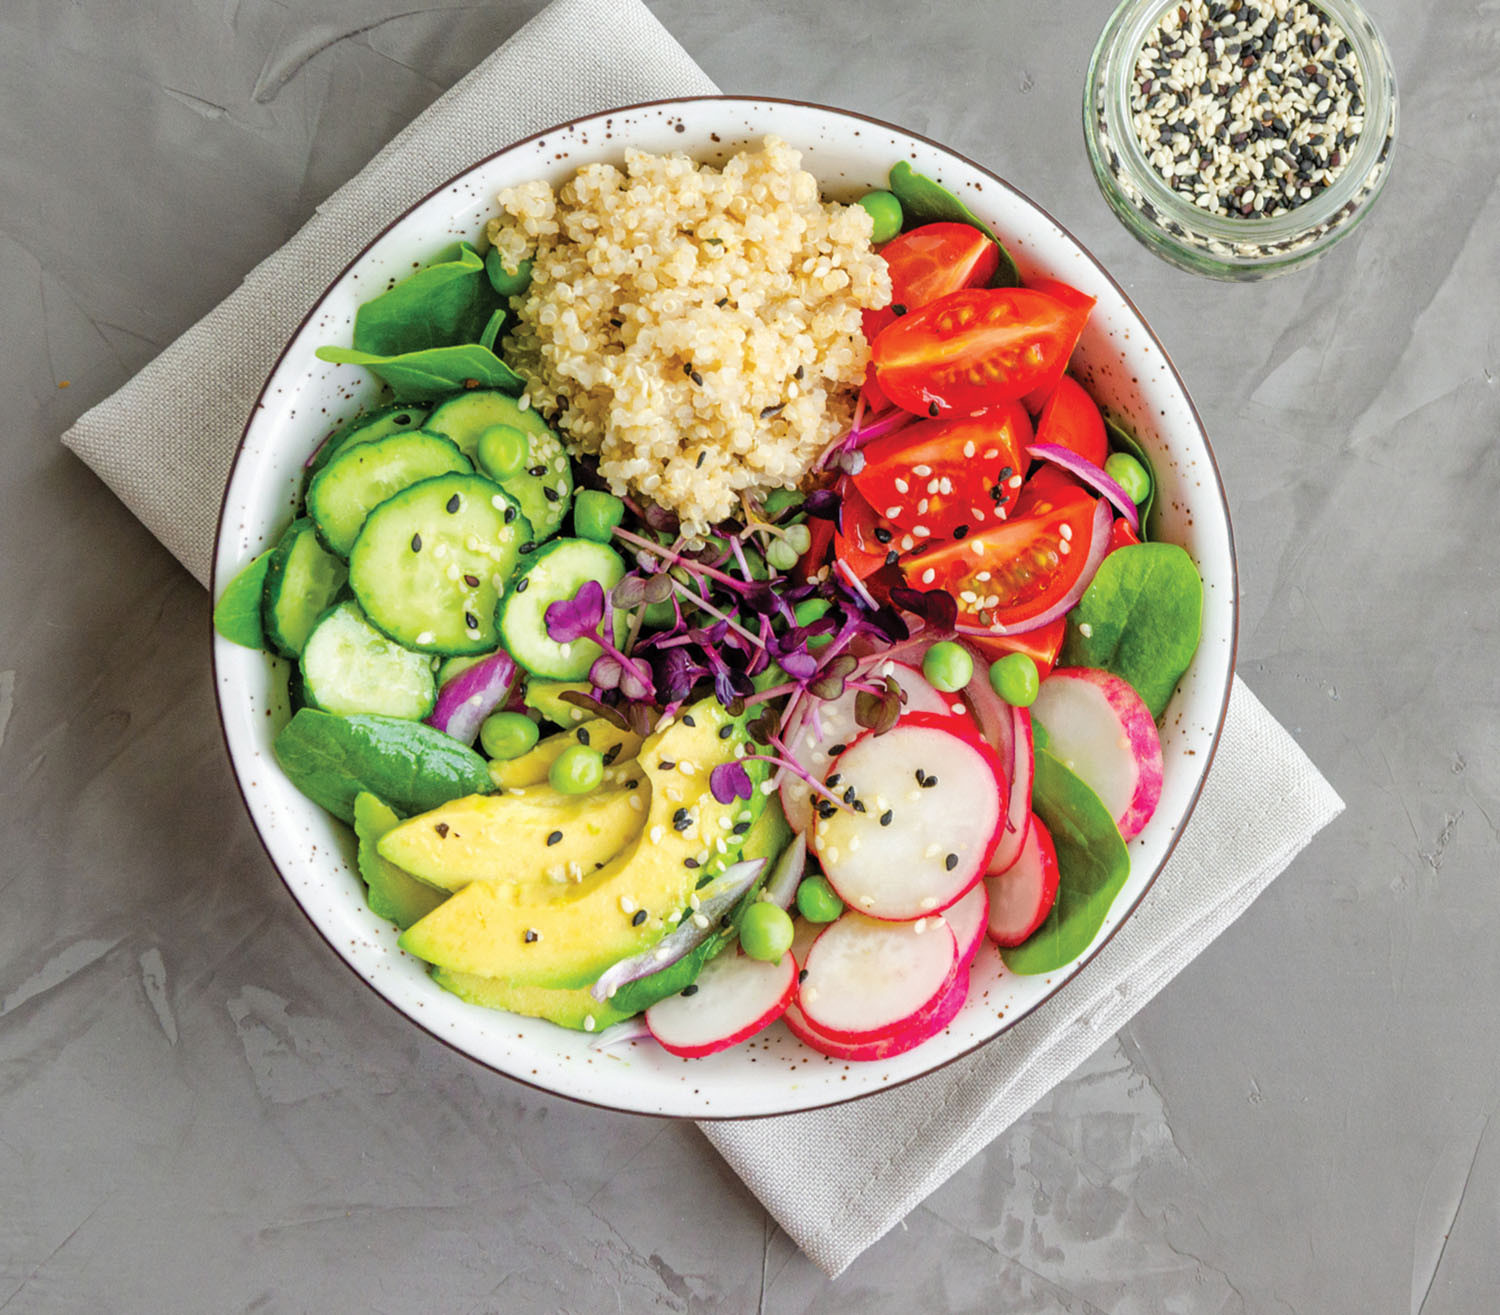 photo from above of a healthy salad that includes cucumber, radish, avocado, tomato, greens, and wild rice